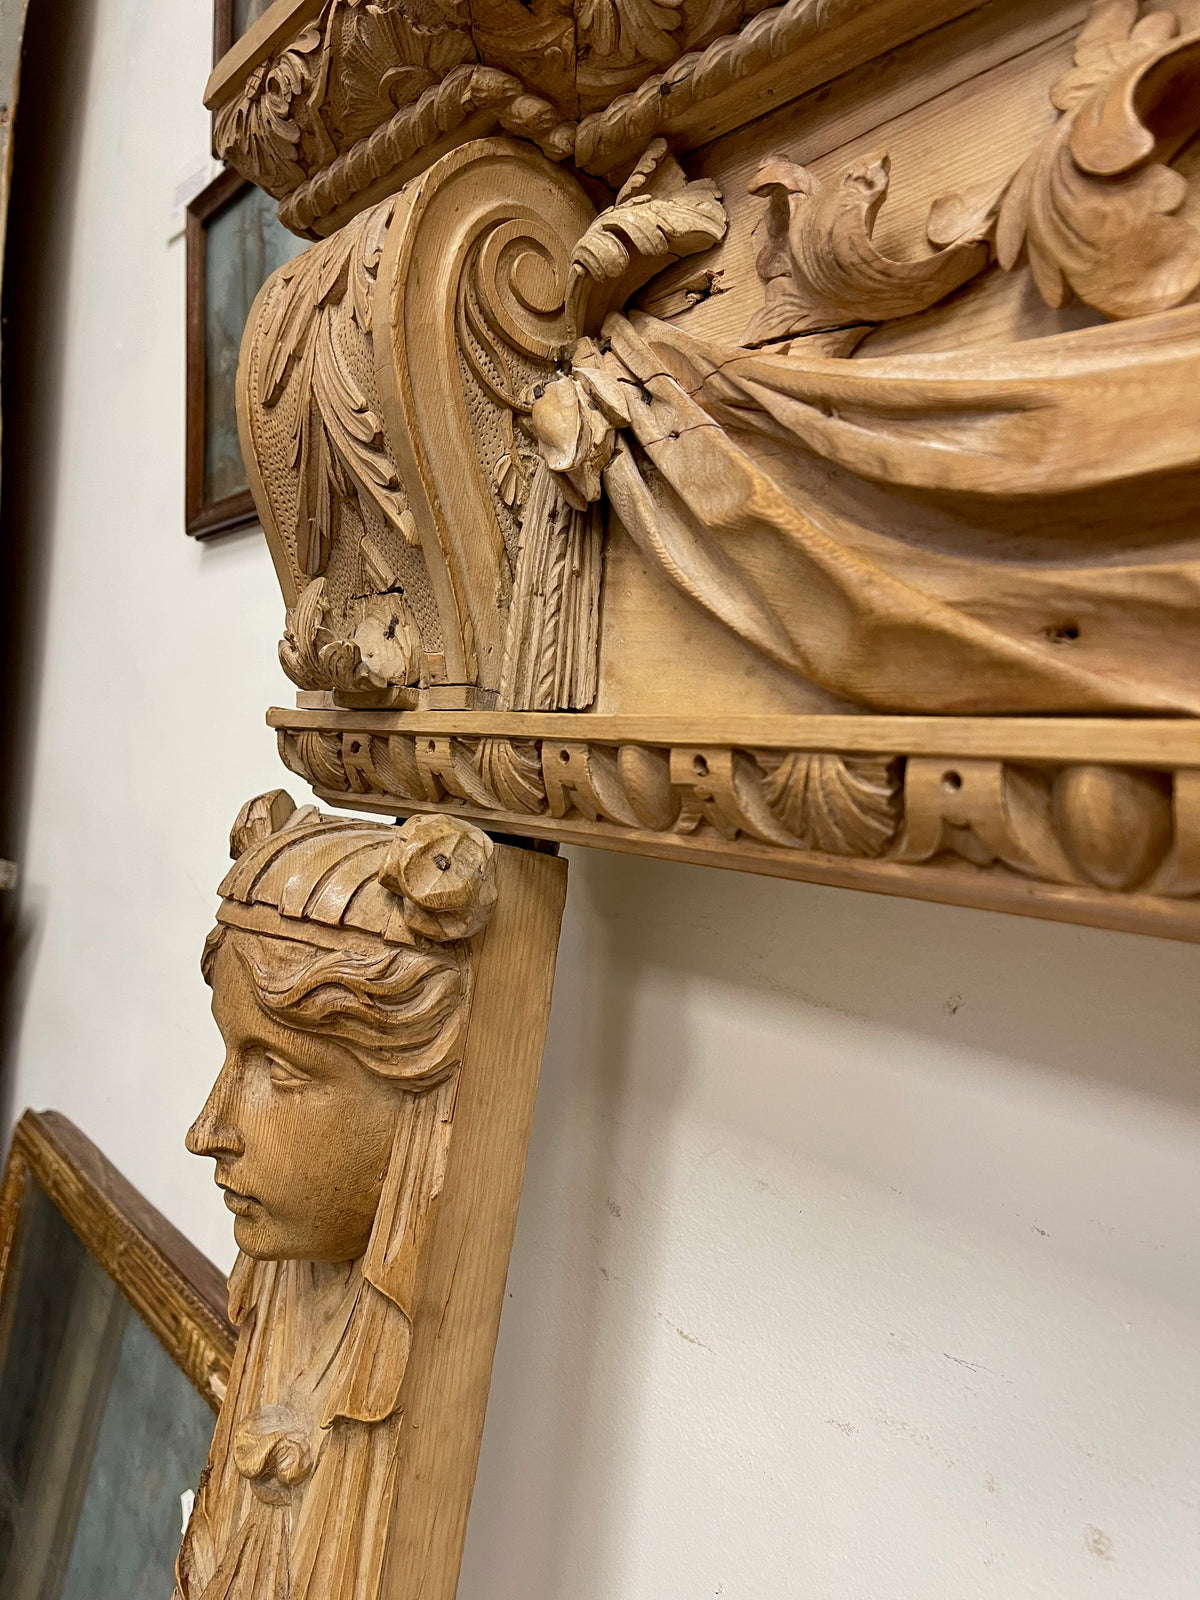 19TH CENTURY FRENCH CLASSICAL CARVED MANTEL